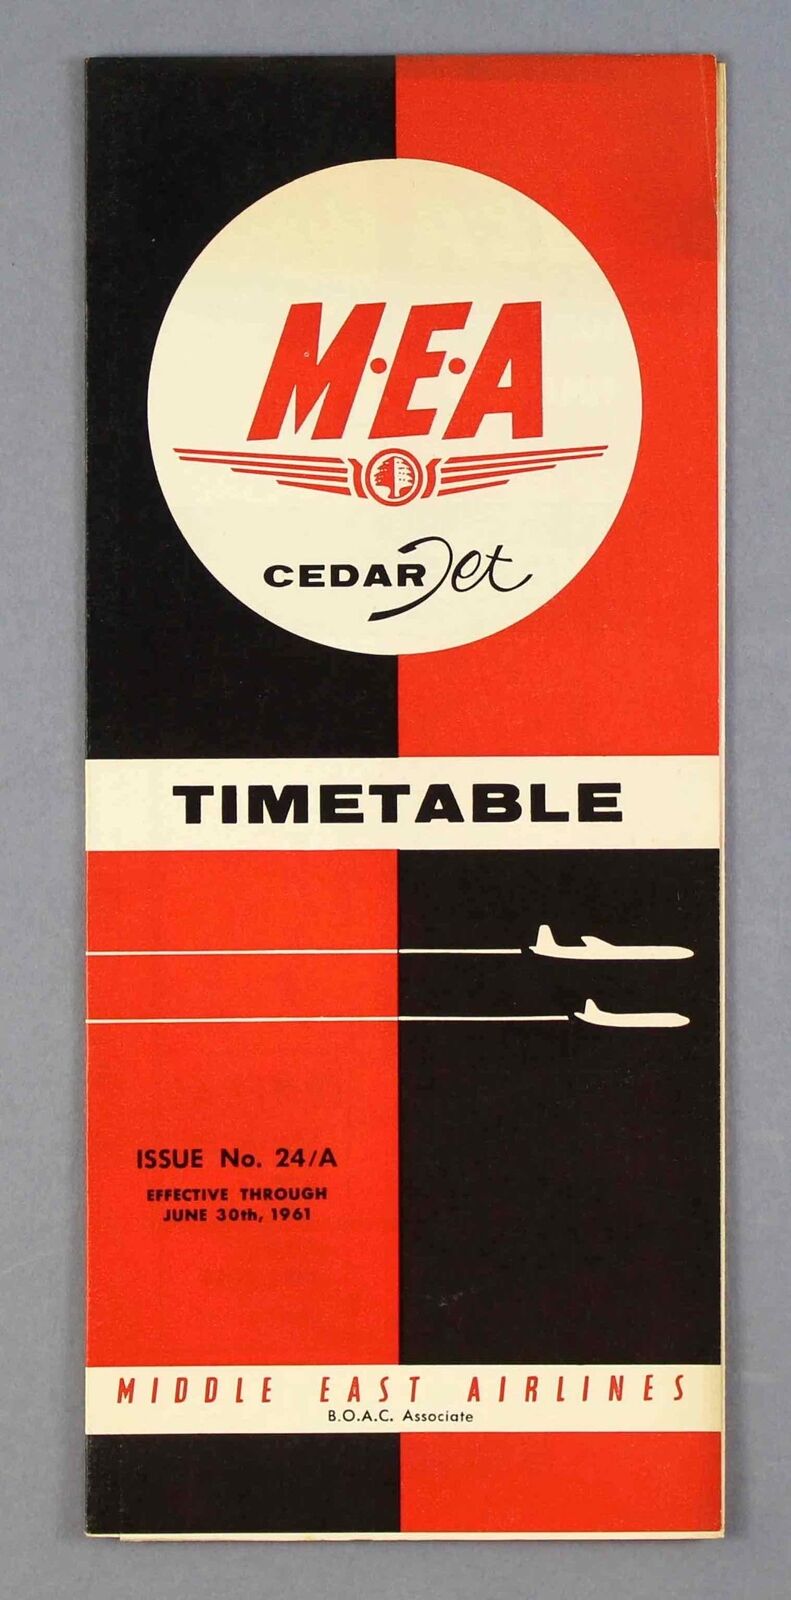 MEA MIDDLE EAST AIRLINES TIMETABLE JUNE 1961 COMET 4C VISCOUNT